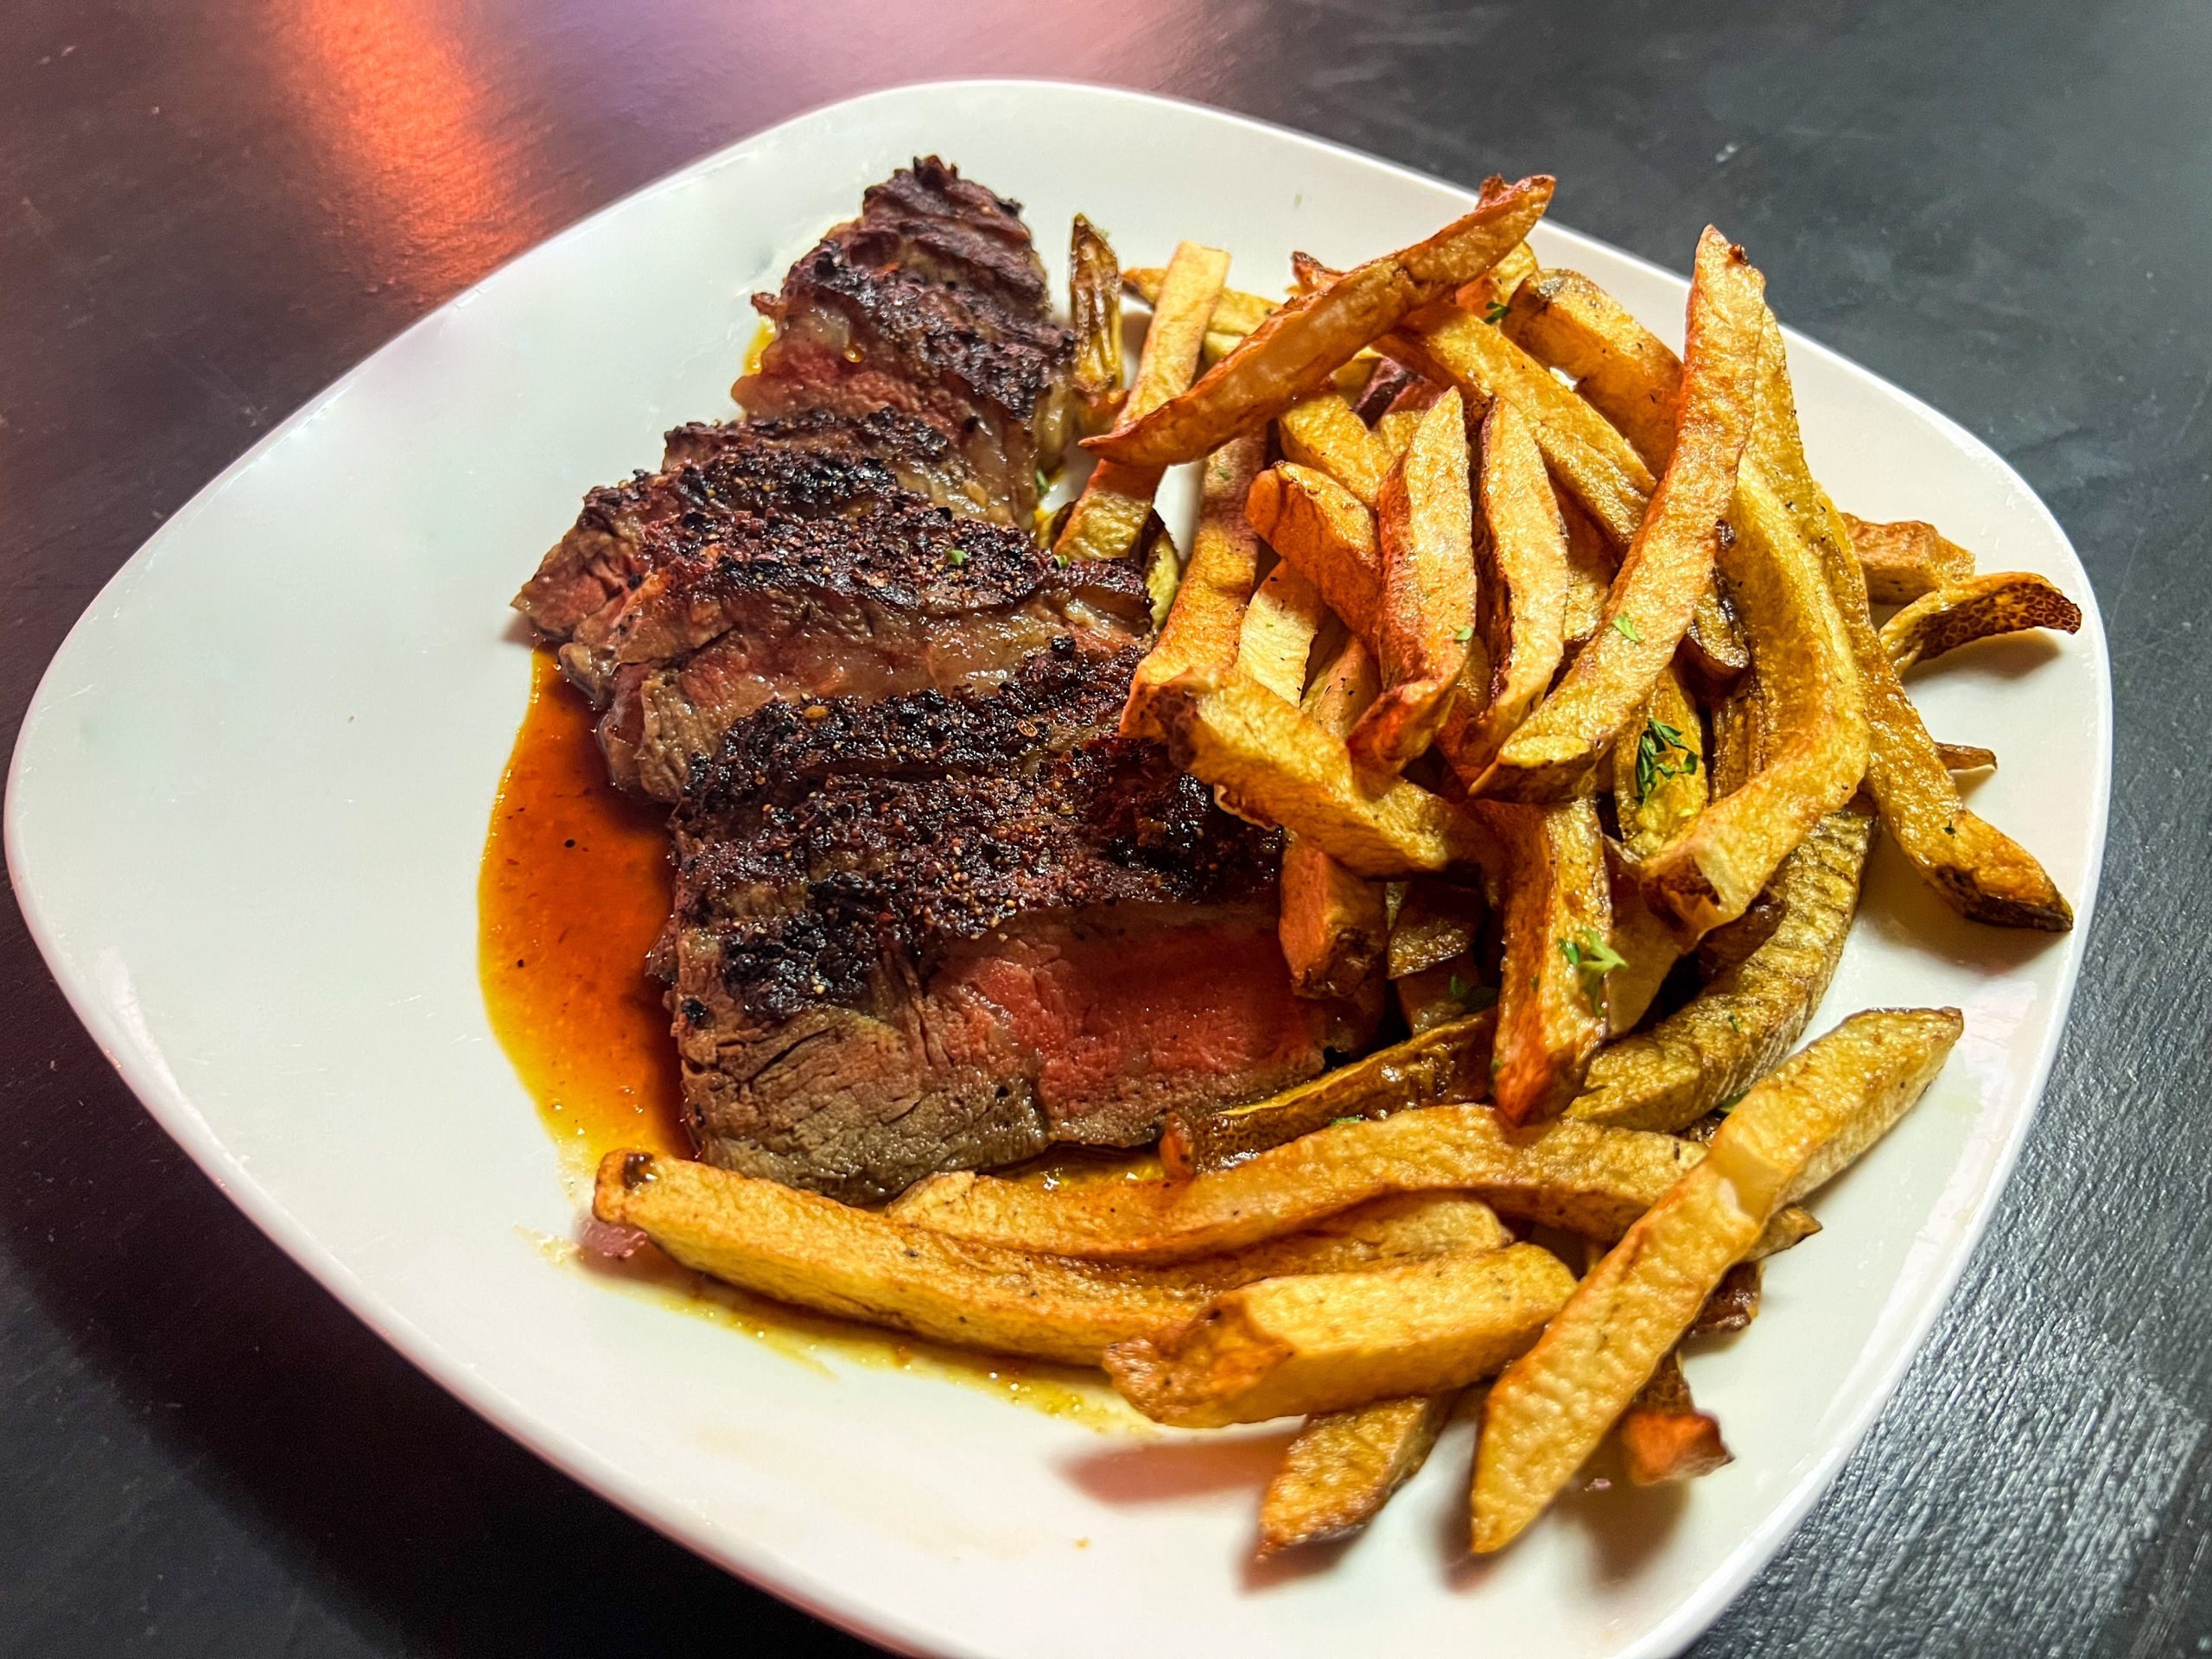 Petite Steak Frites which is a part of the happy hour menu